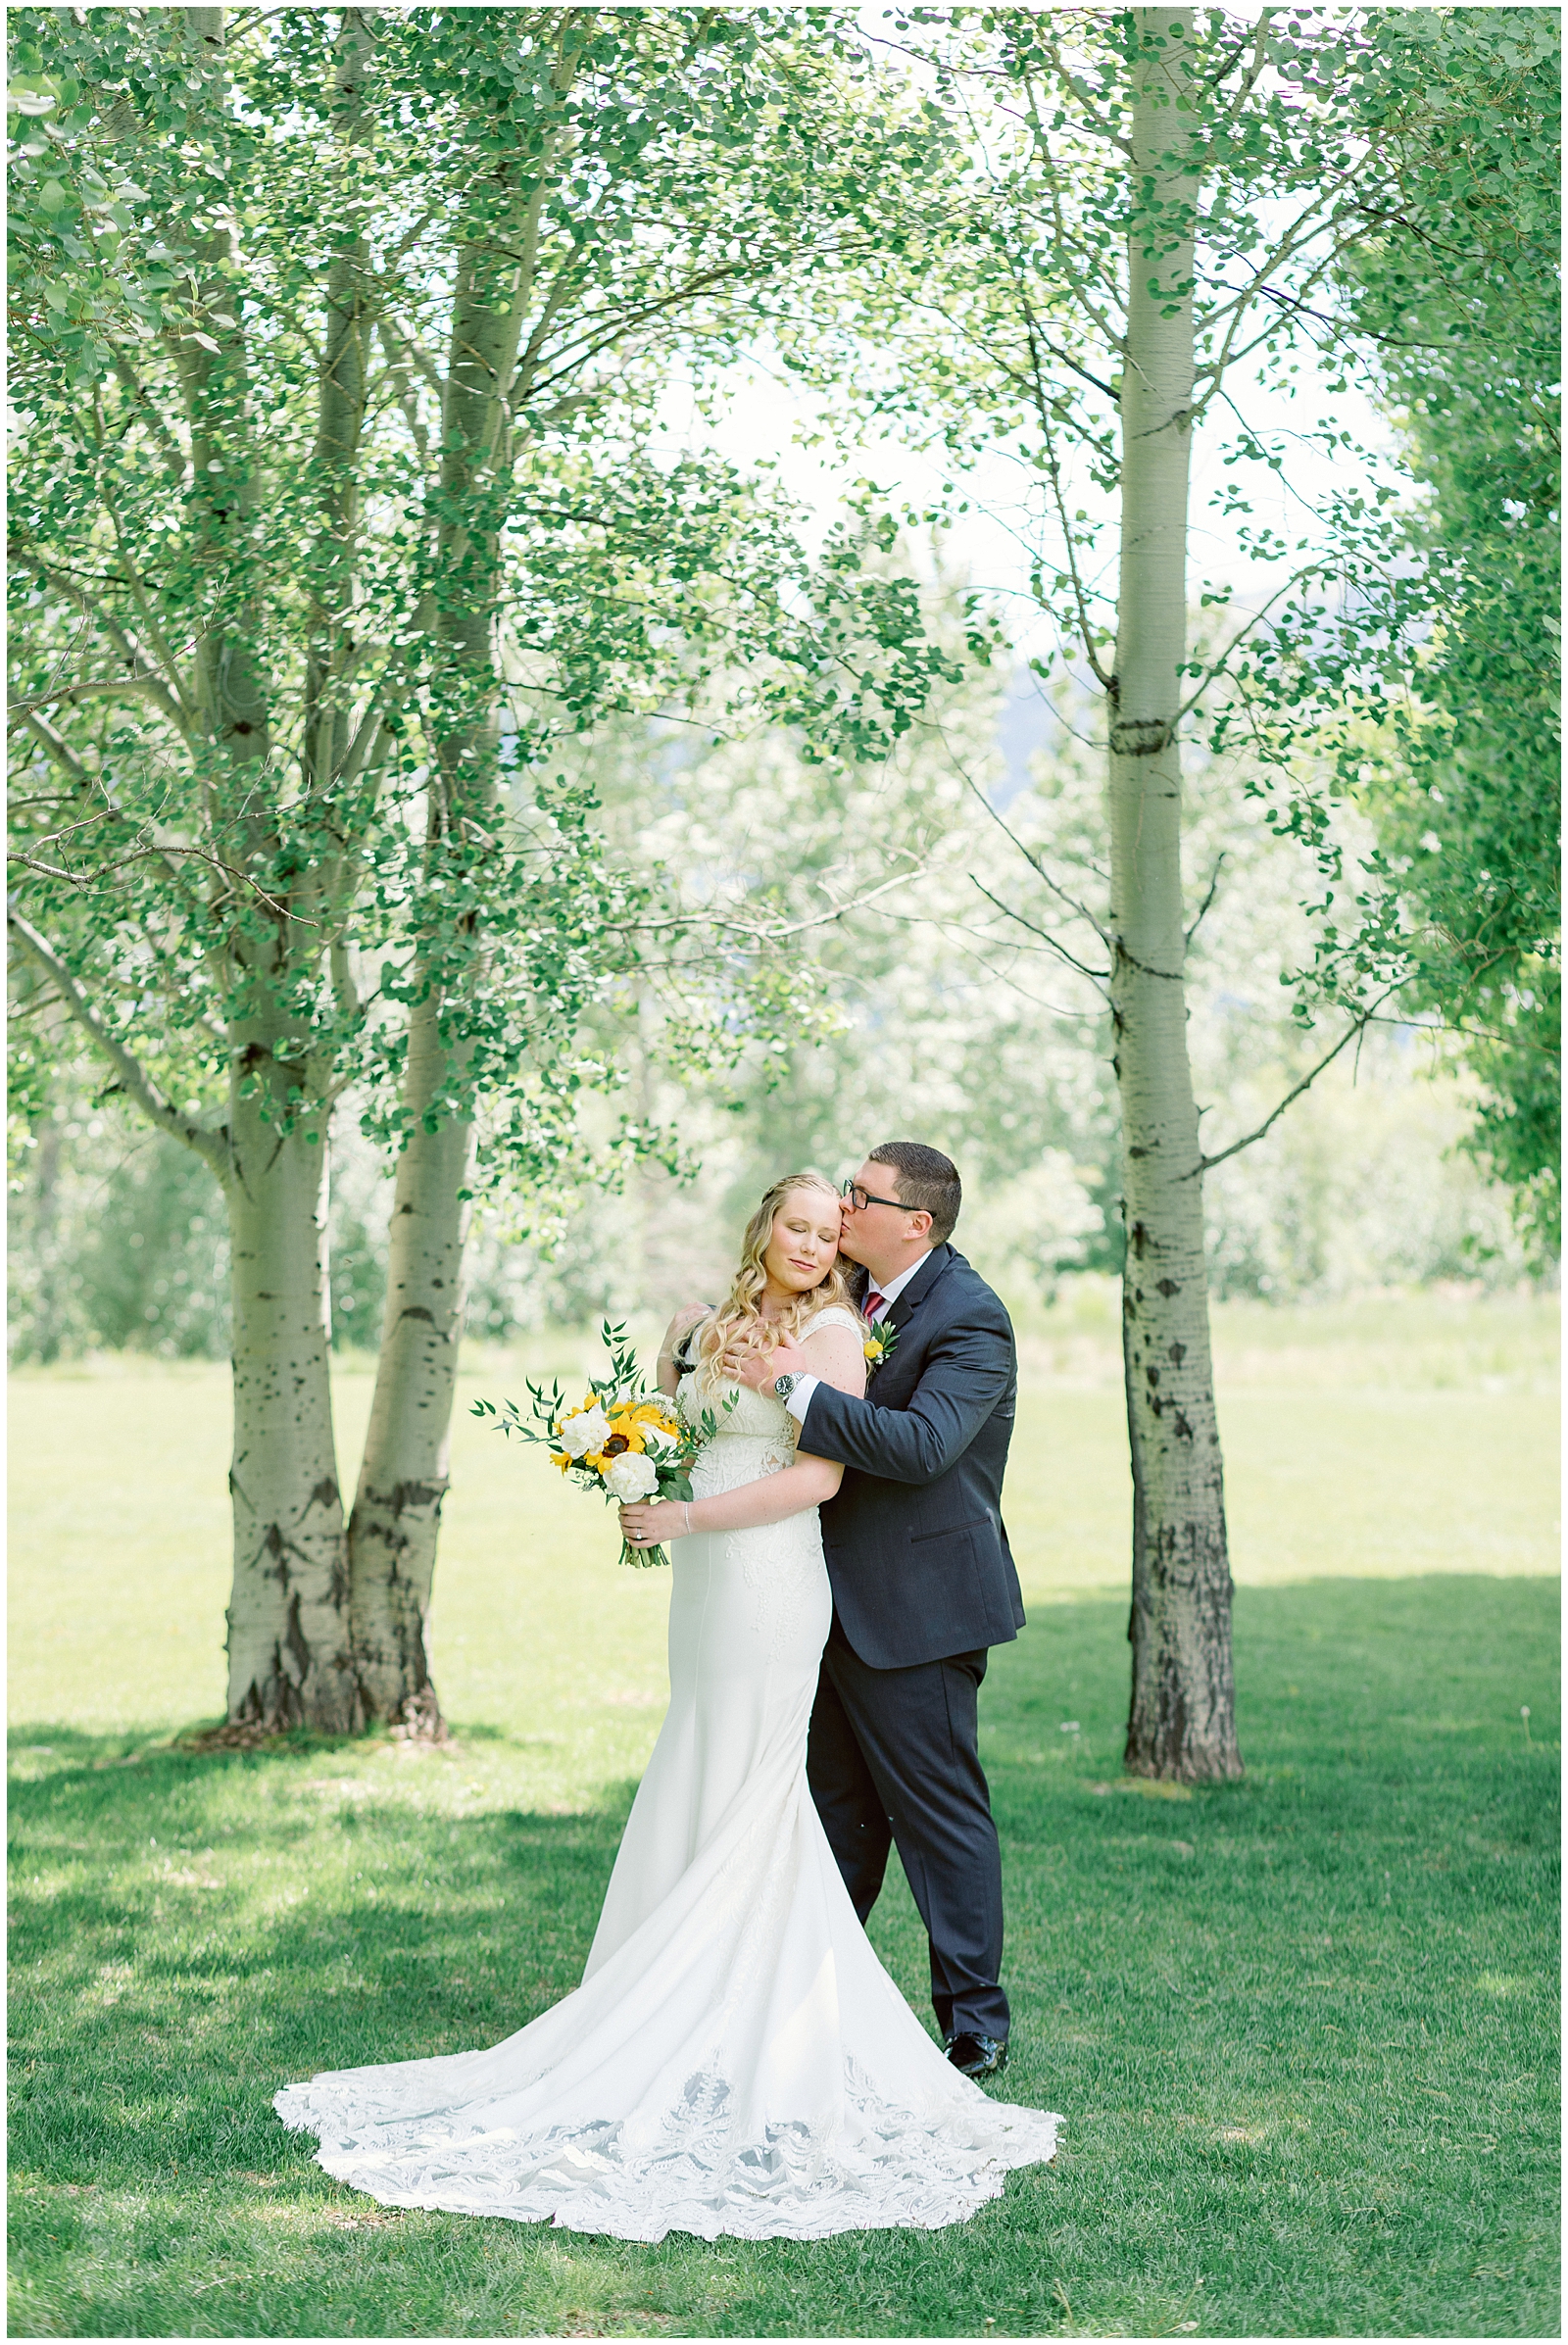 Sun Valley Trail Creek Cabin Wedding Portraits of the Bride and Groom